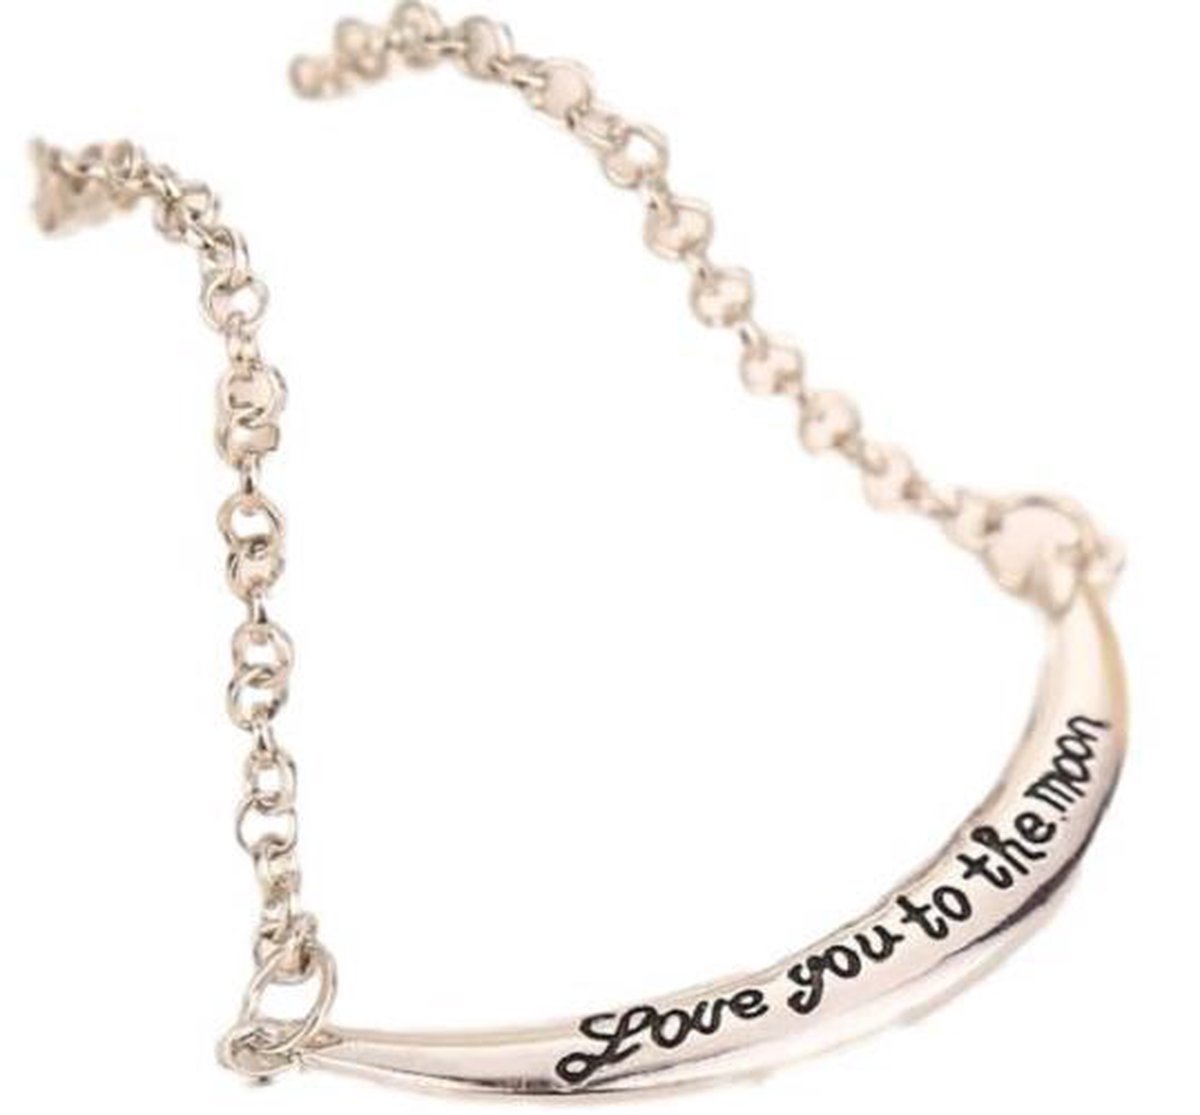 BY-ST6 Armband met quote 